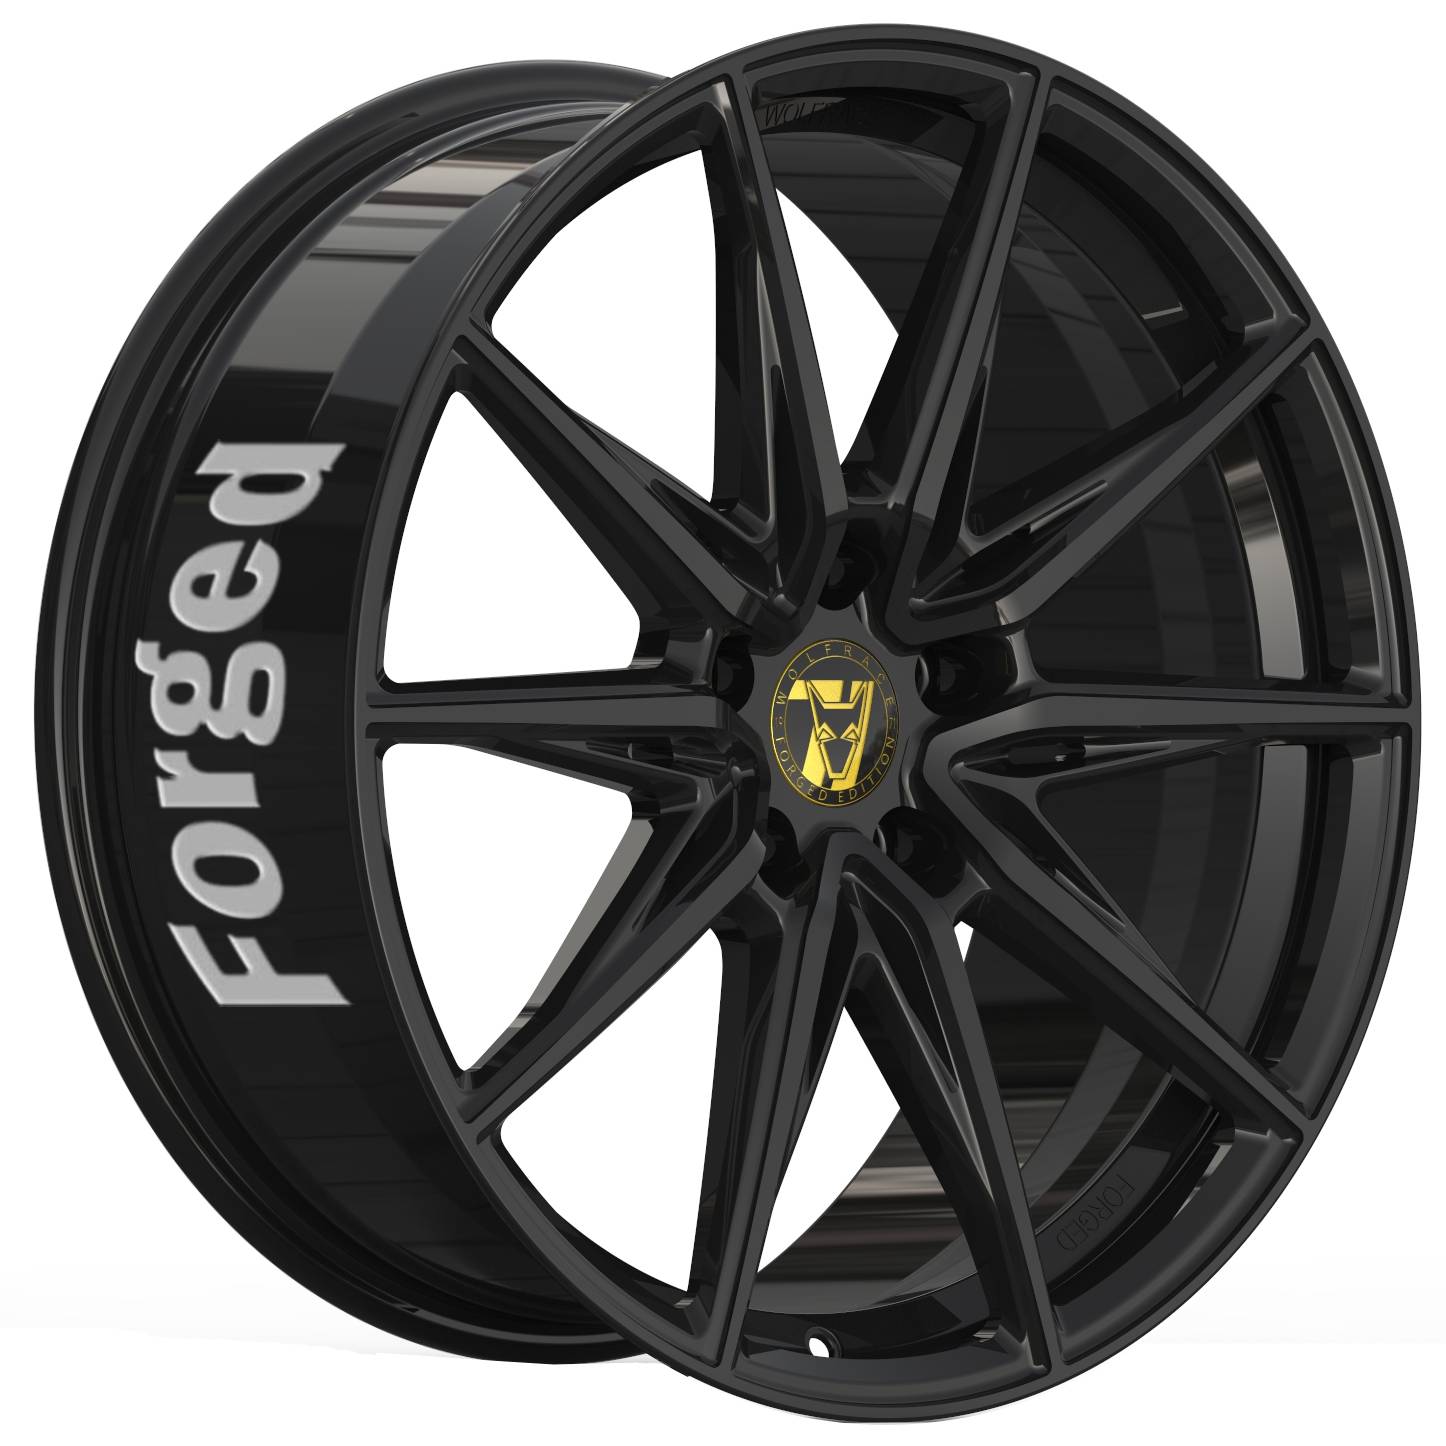 Jantes alu Demon Wheels 71 Forged Edition Urban Racer Forged [13x24] -5x114.3- ET 20